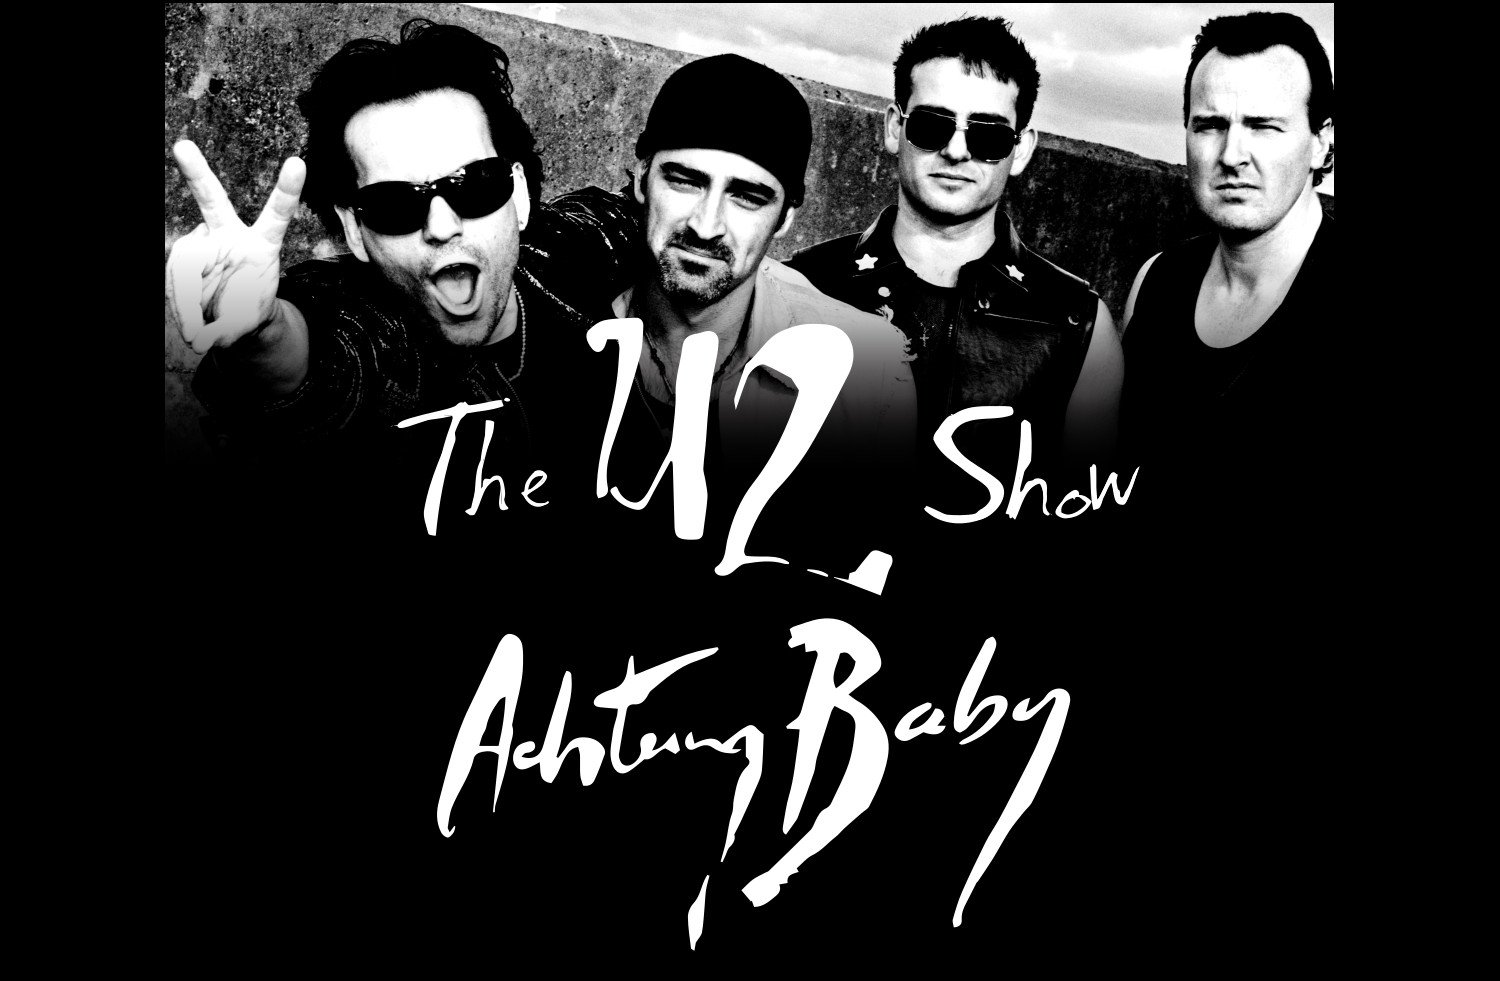 The U2 Show – Achtung Baby present “Zoo TV: Live from Sydney”